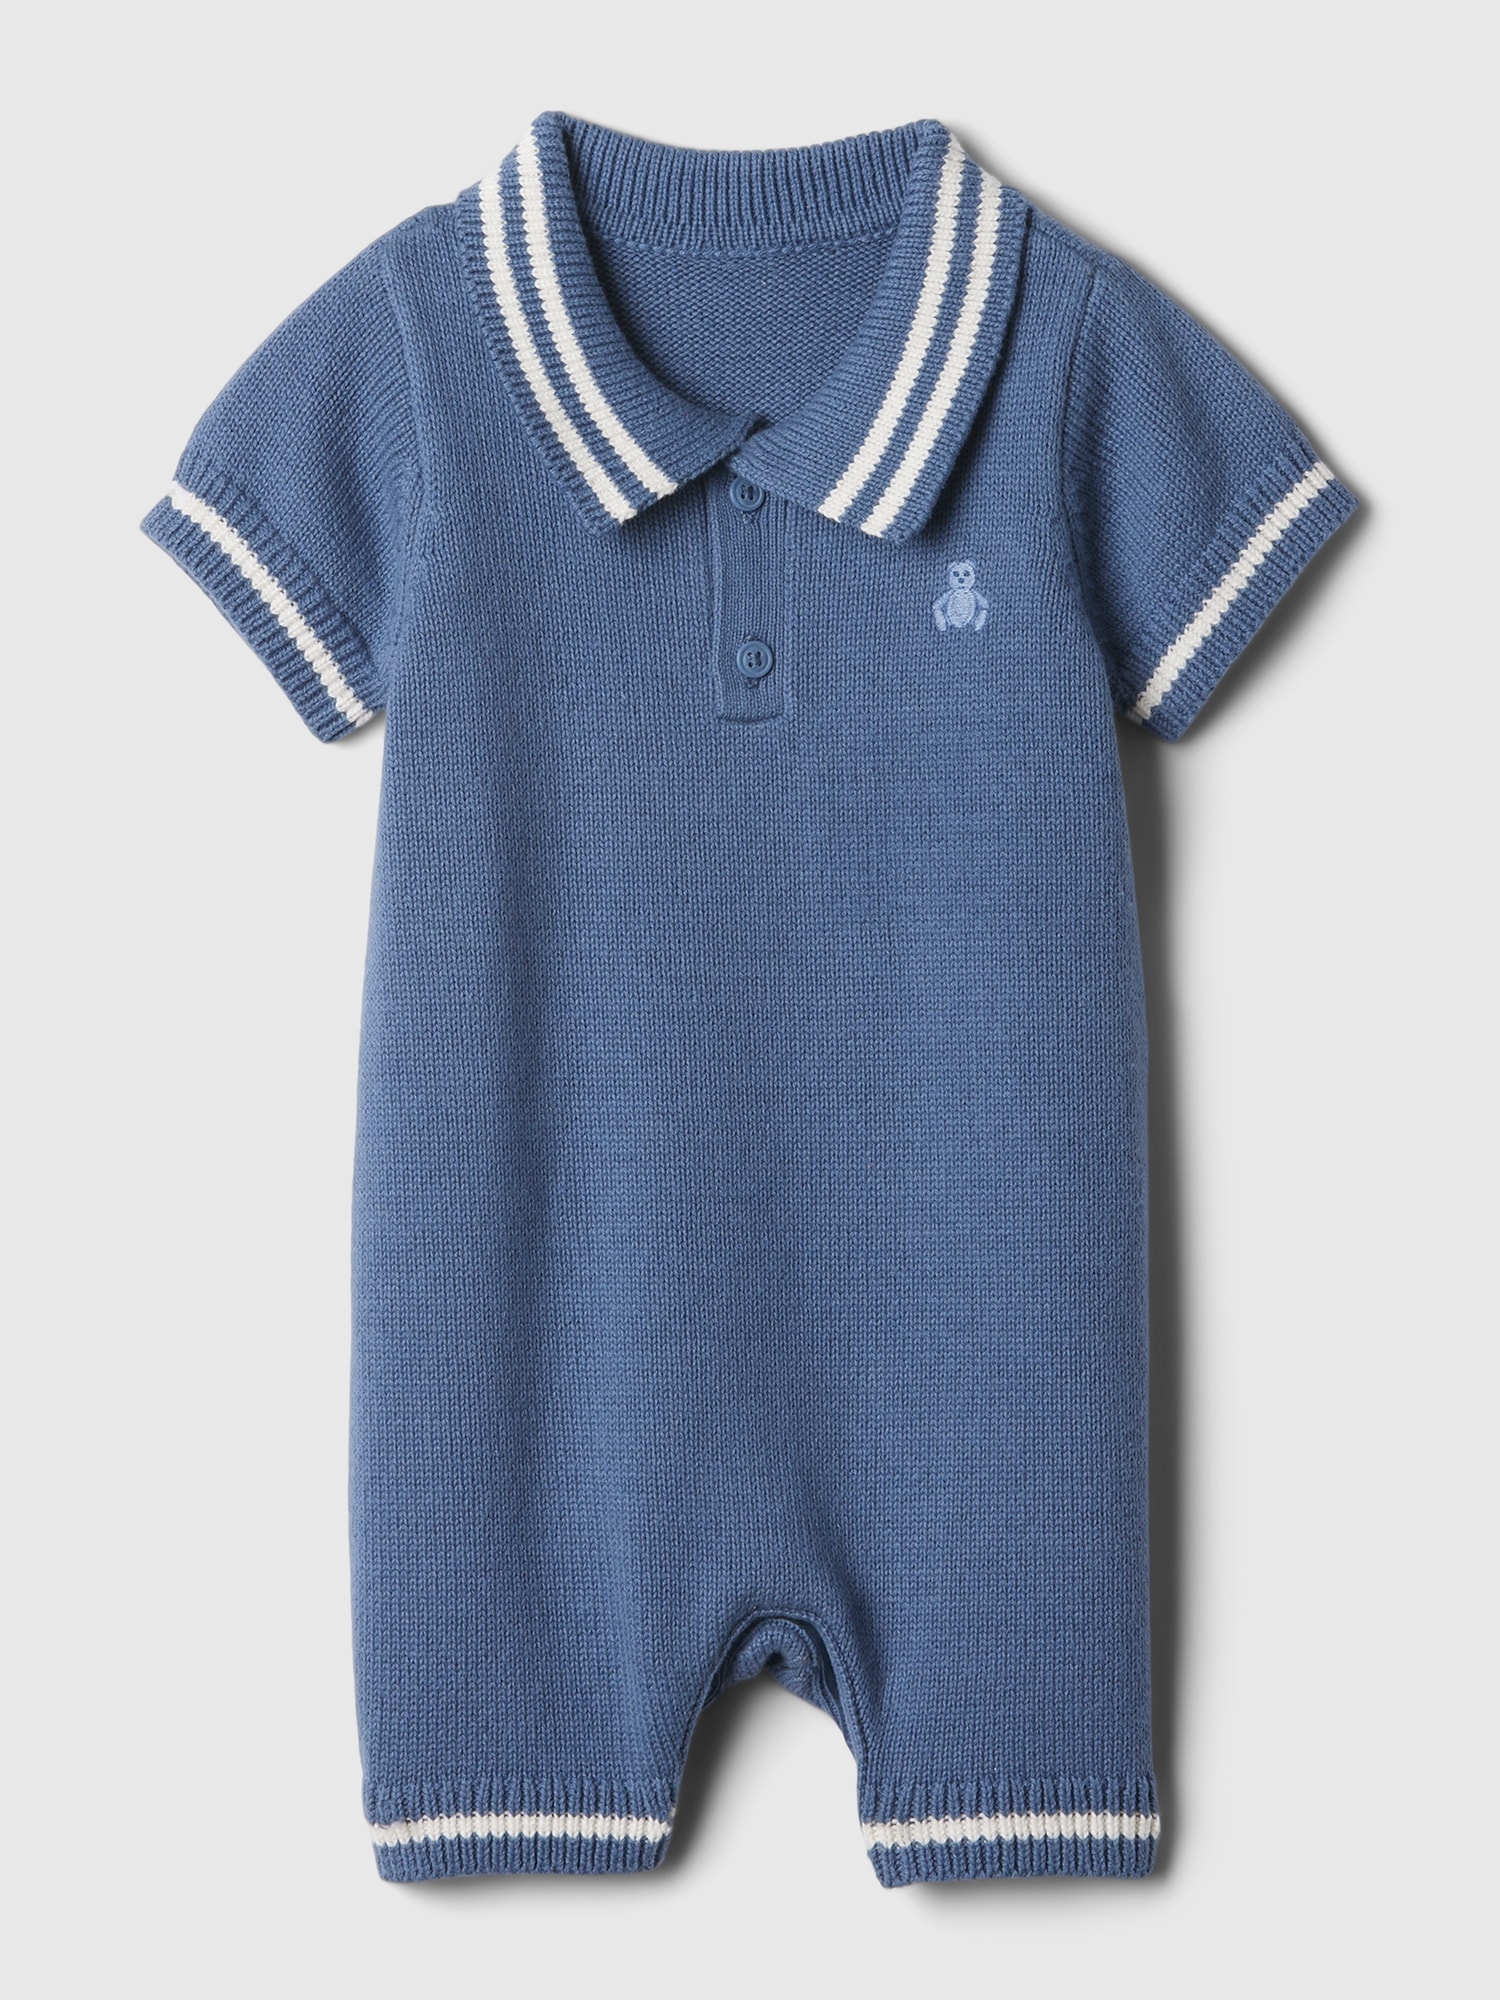 Baby Polo Shirt Sweater Shorty One-Piece